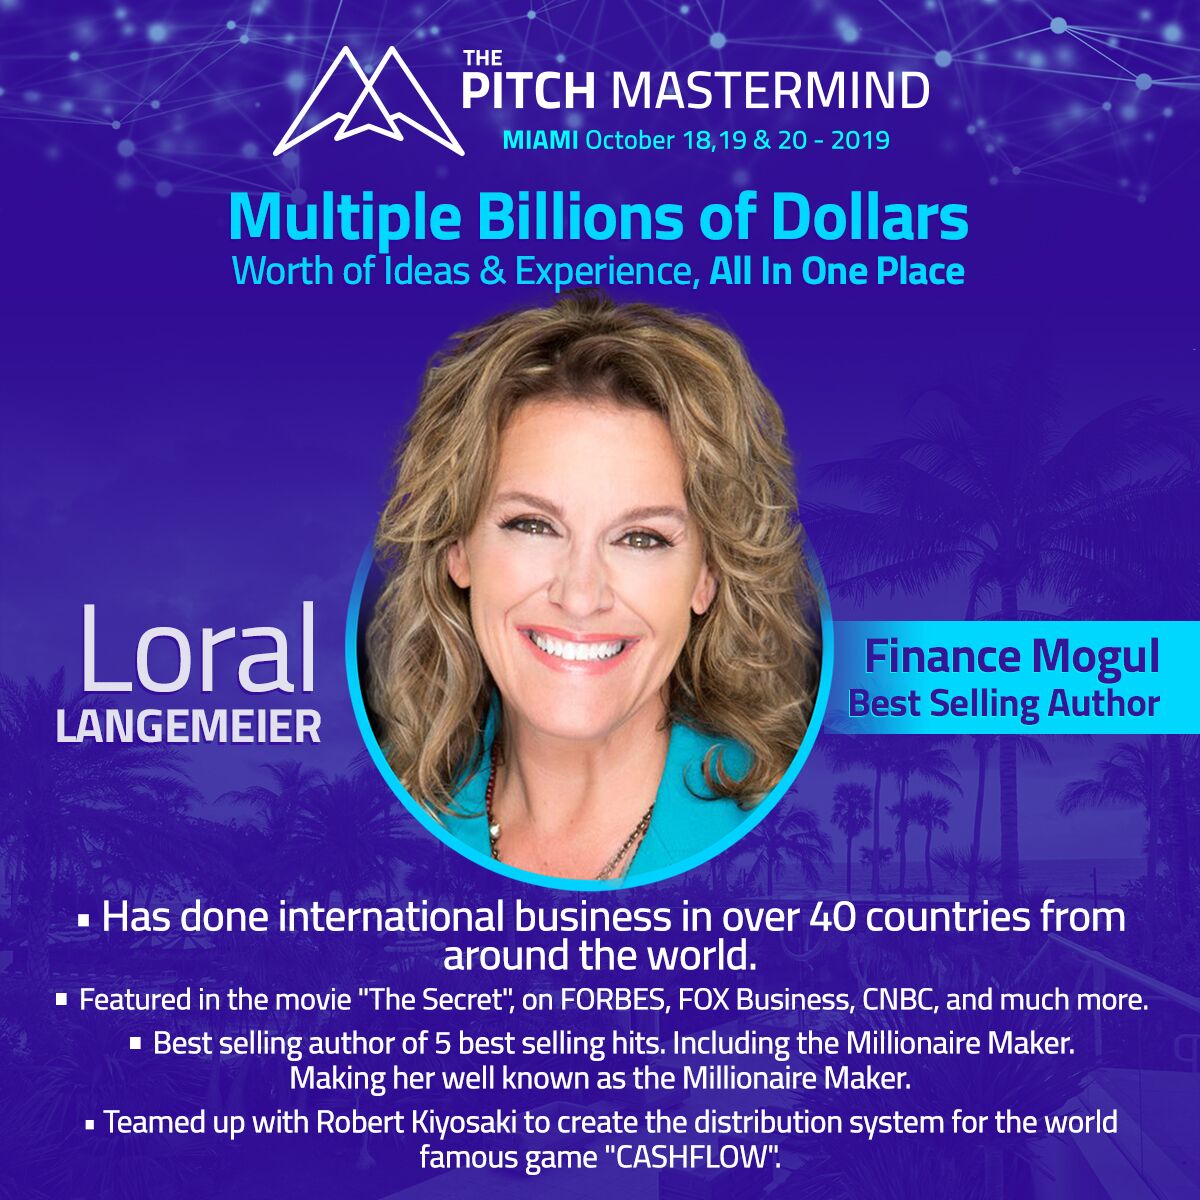 the pitch mastermind Loral